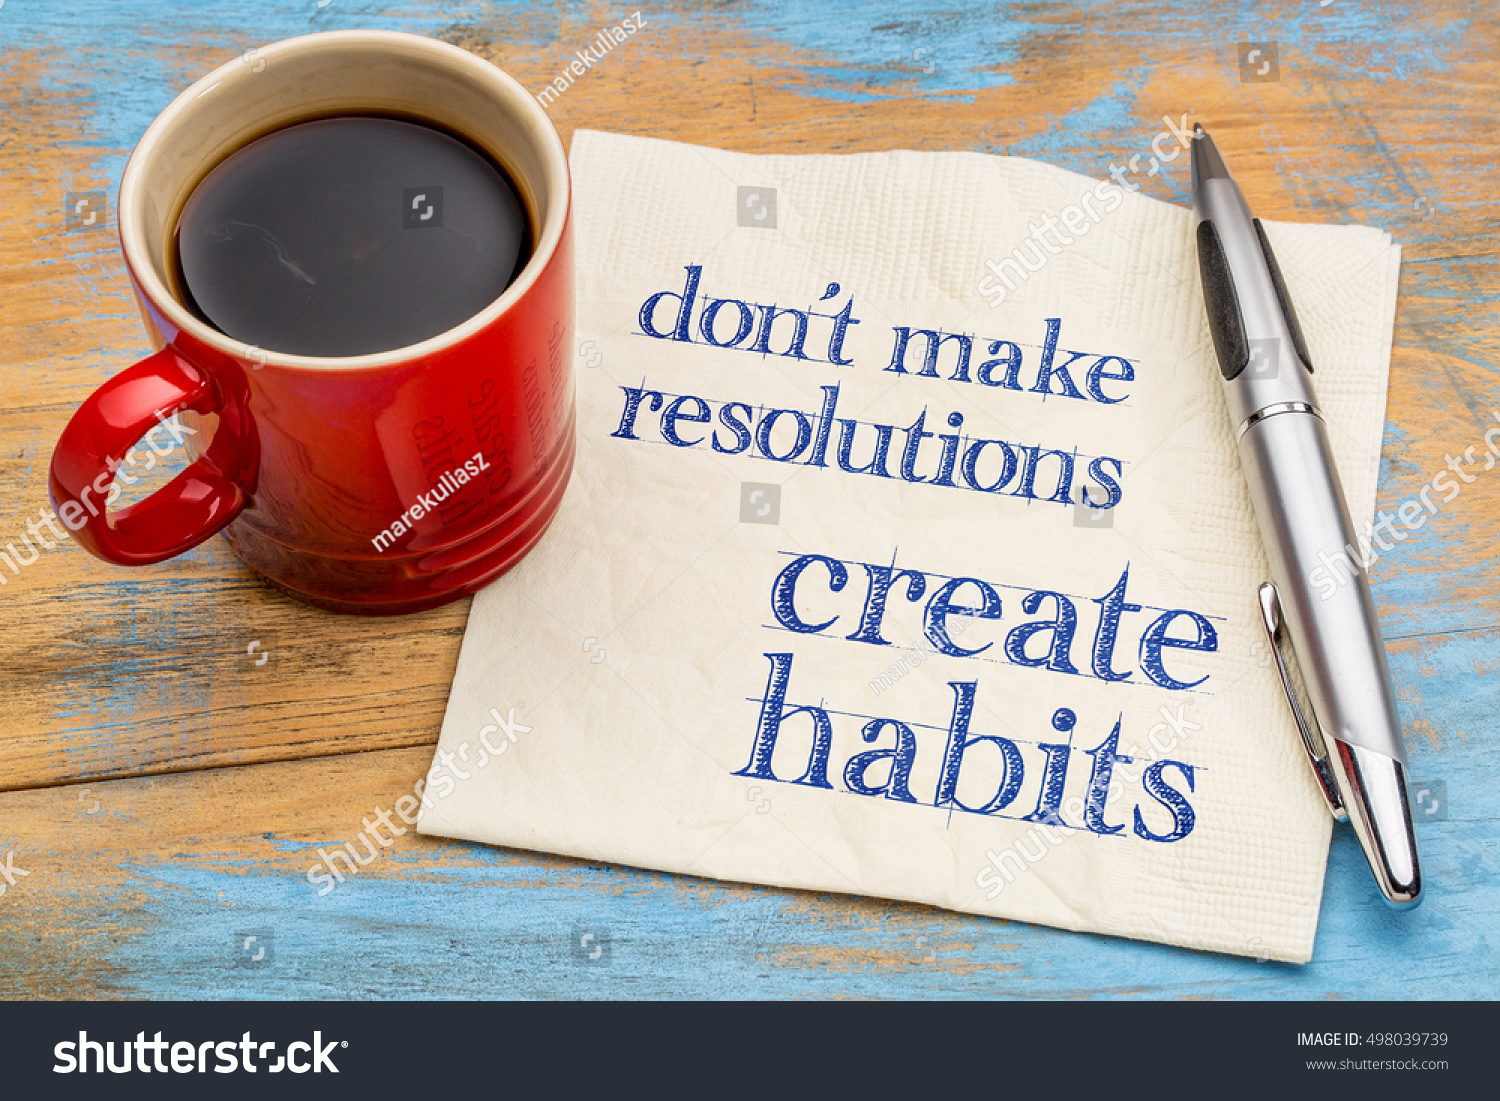 Do not make resolutions, create habits  - motivational advice or reminder on a napkin with a cup of coffee #498039739